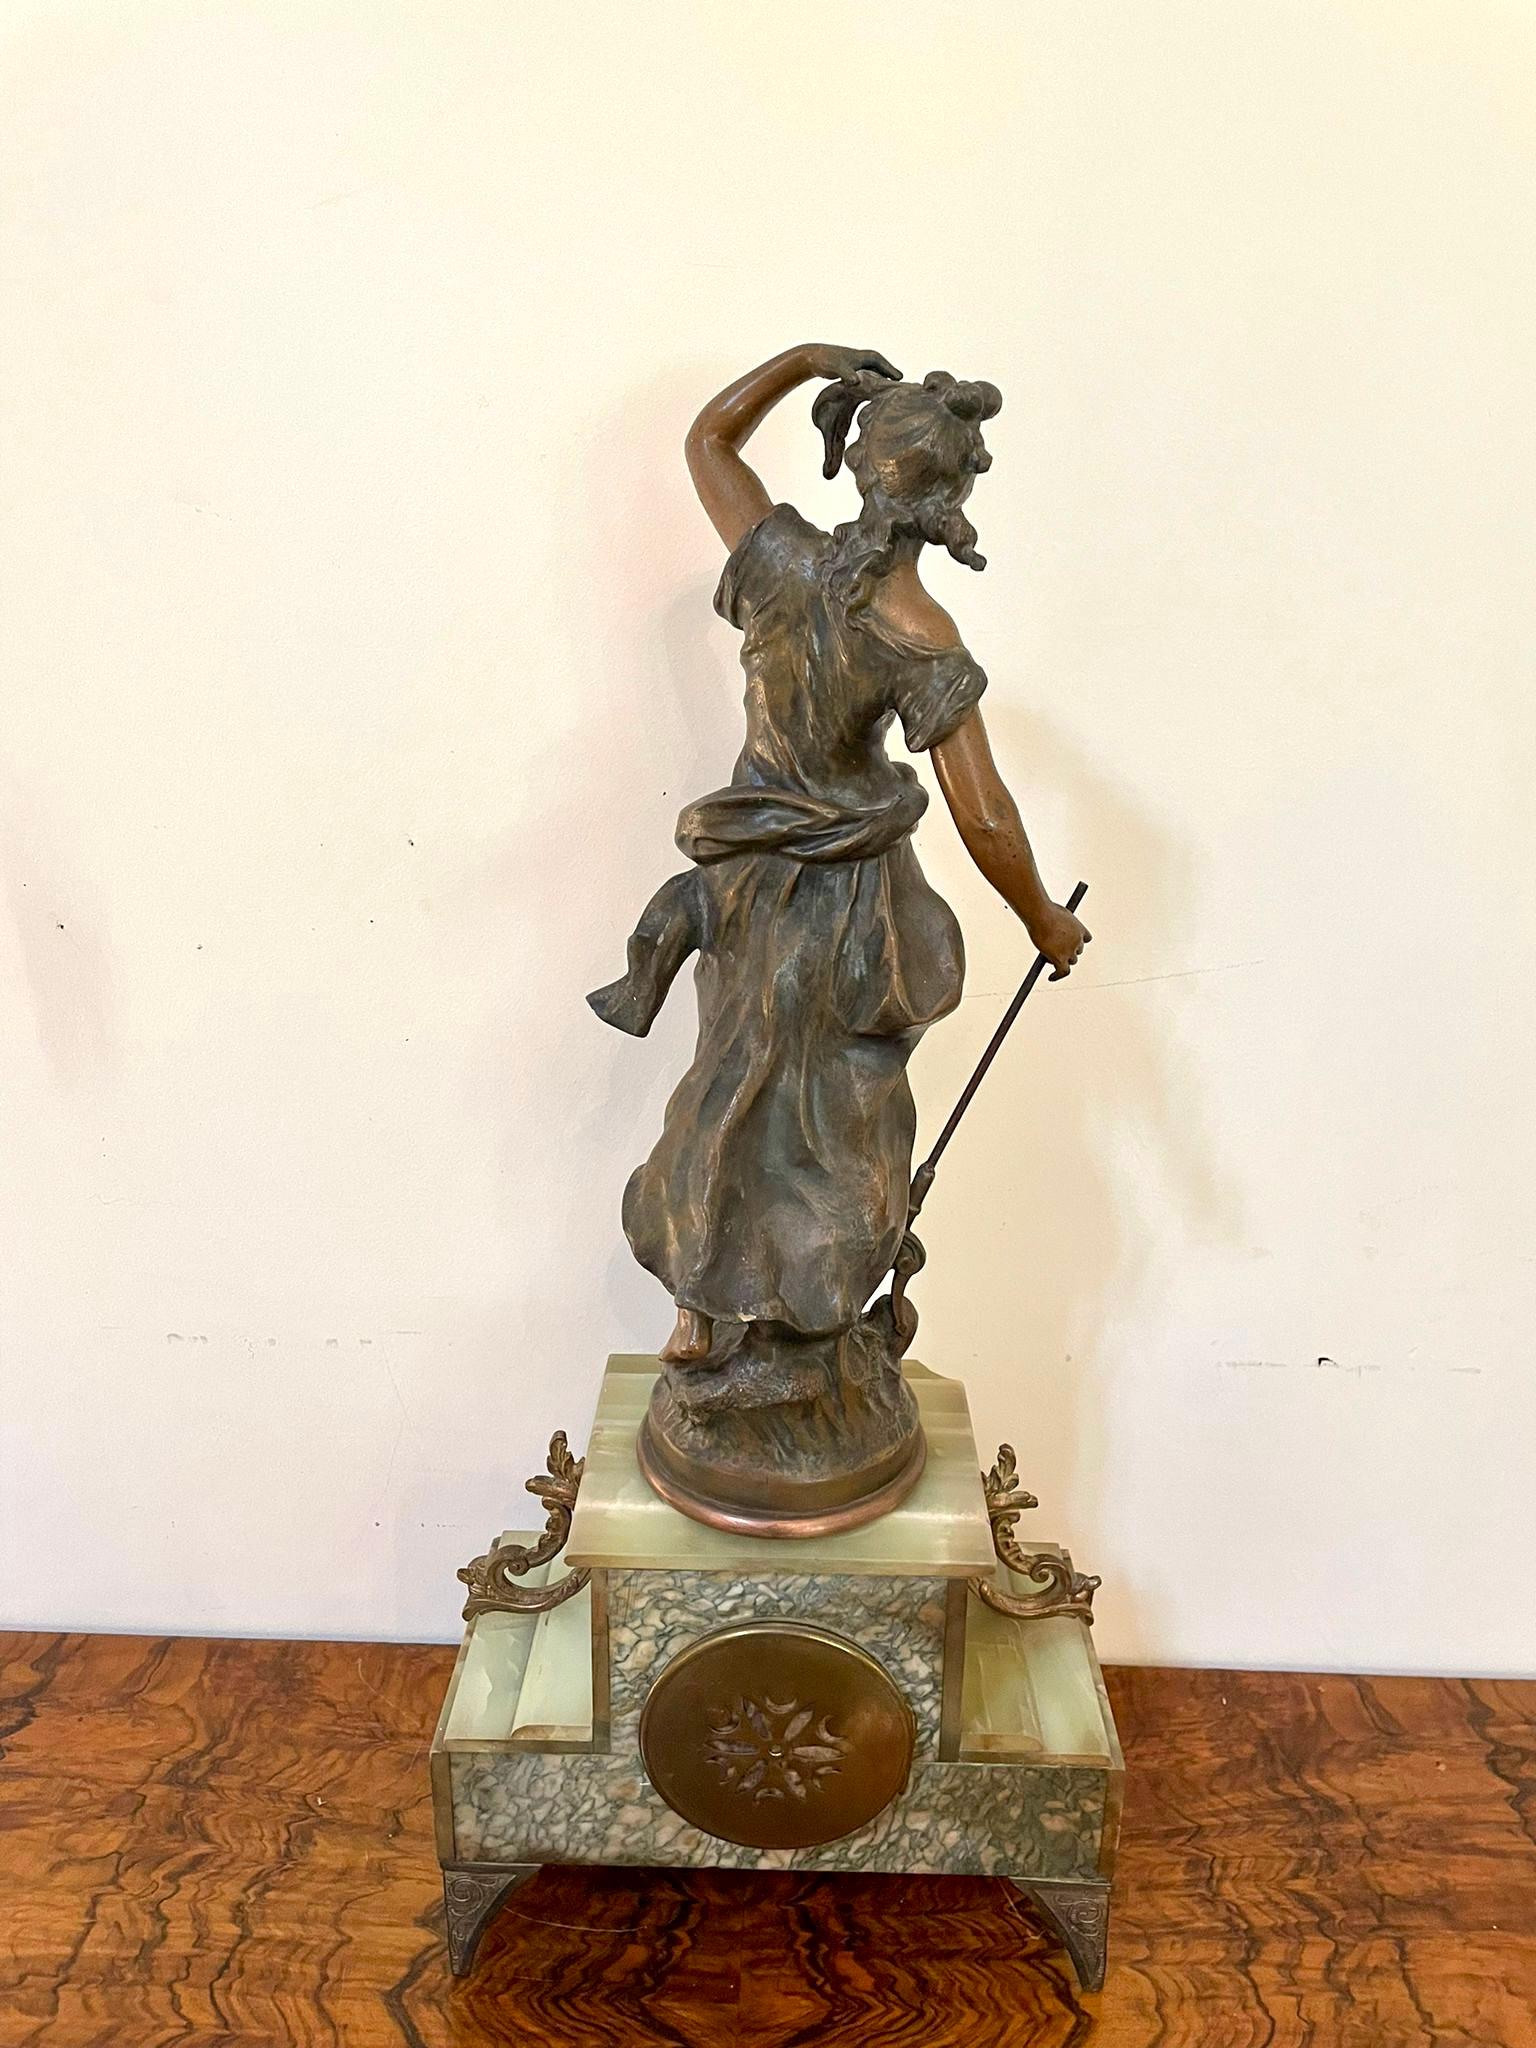 Antique 19th century French spelter and onyx clock having a quality painted dial, original hands and eight day movement striking on the hour and half hour on a bell. A beautiful quality onyx case surmounted by a spelter figure of amphitrite after